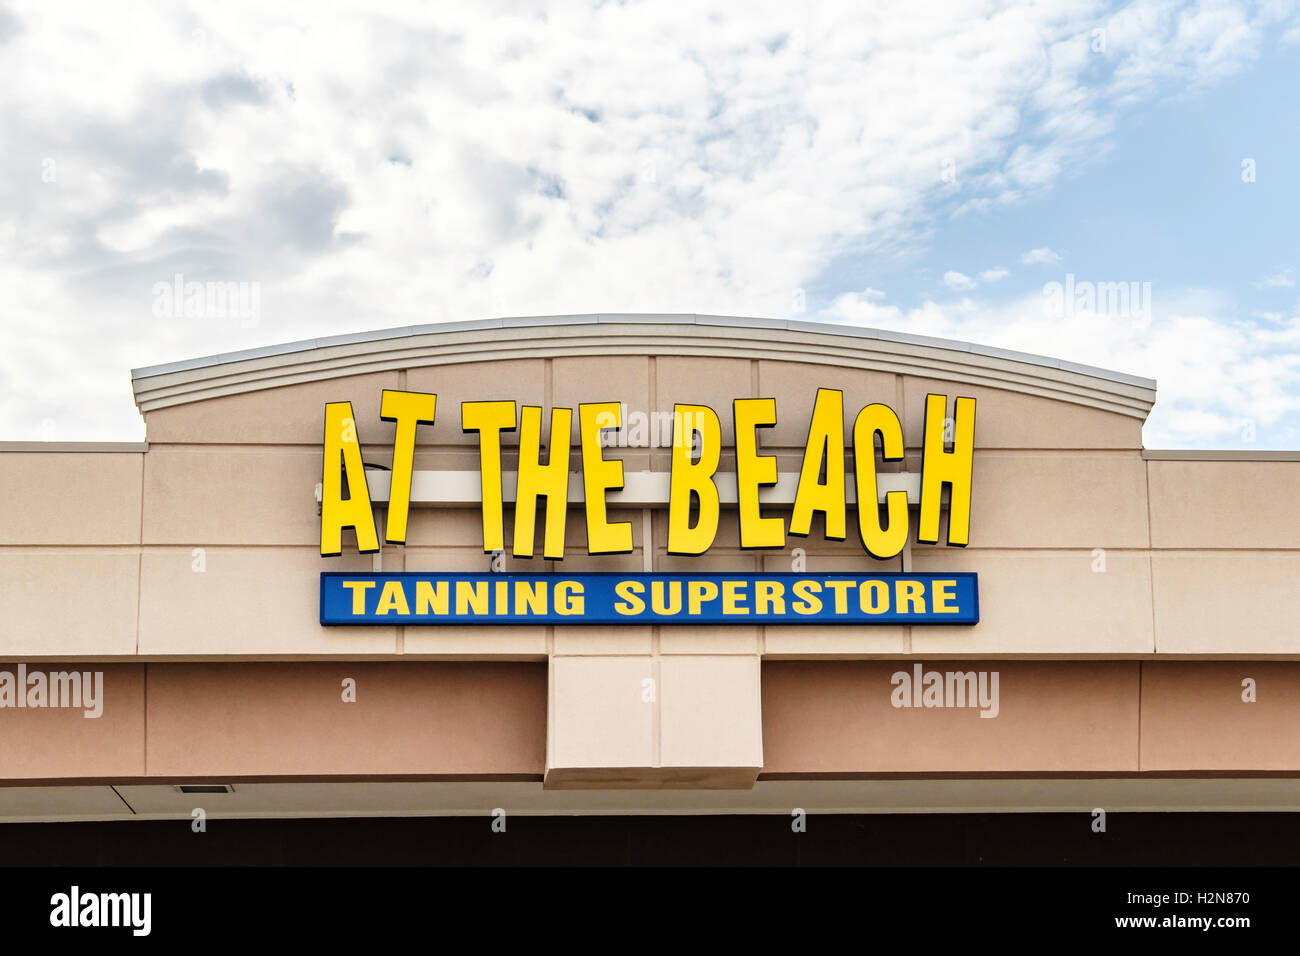 The exterior logo and sign of At The Beach a tanning superstore located at 2108 SW 74th, Oklahoma City, Oklahoma, USA. Stock Photo